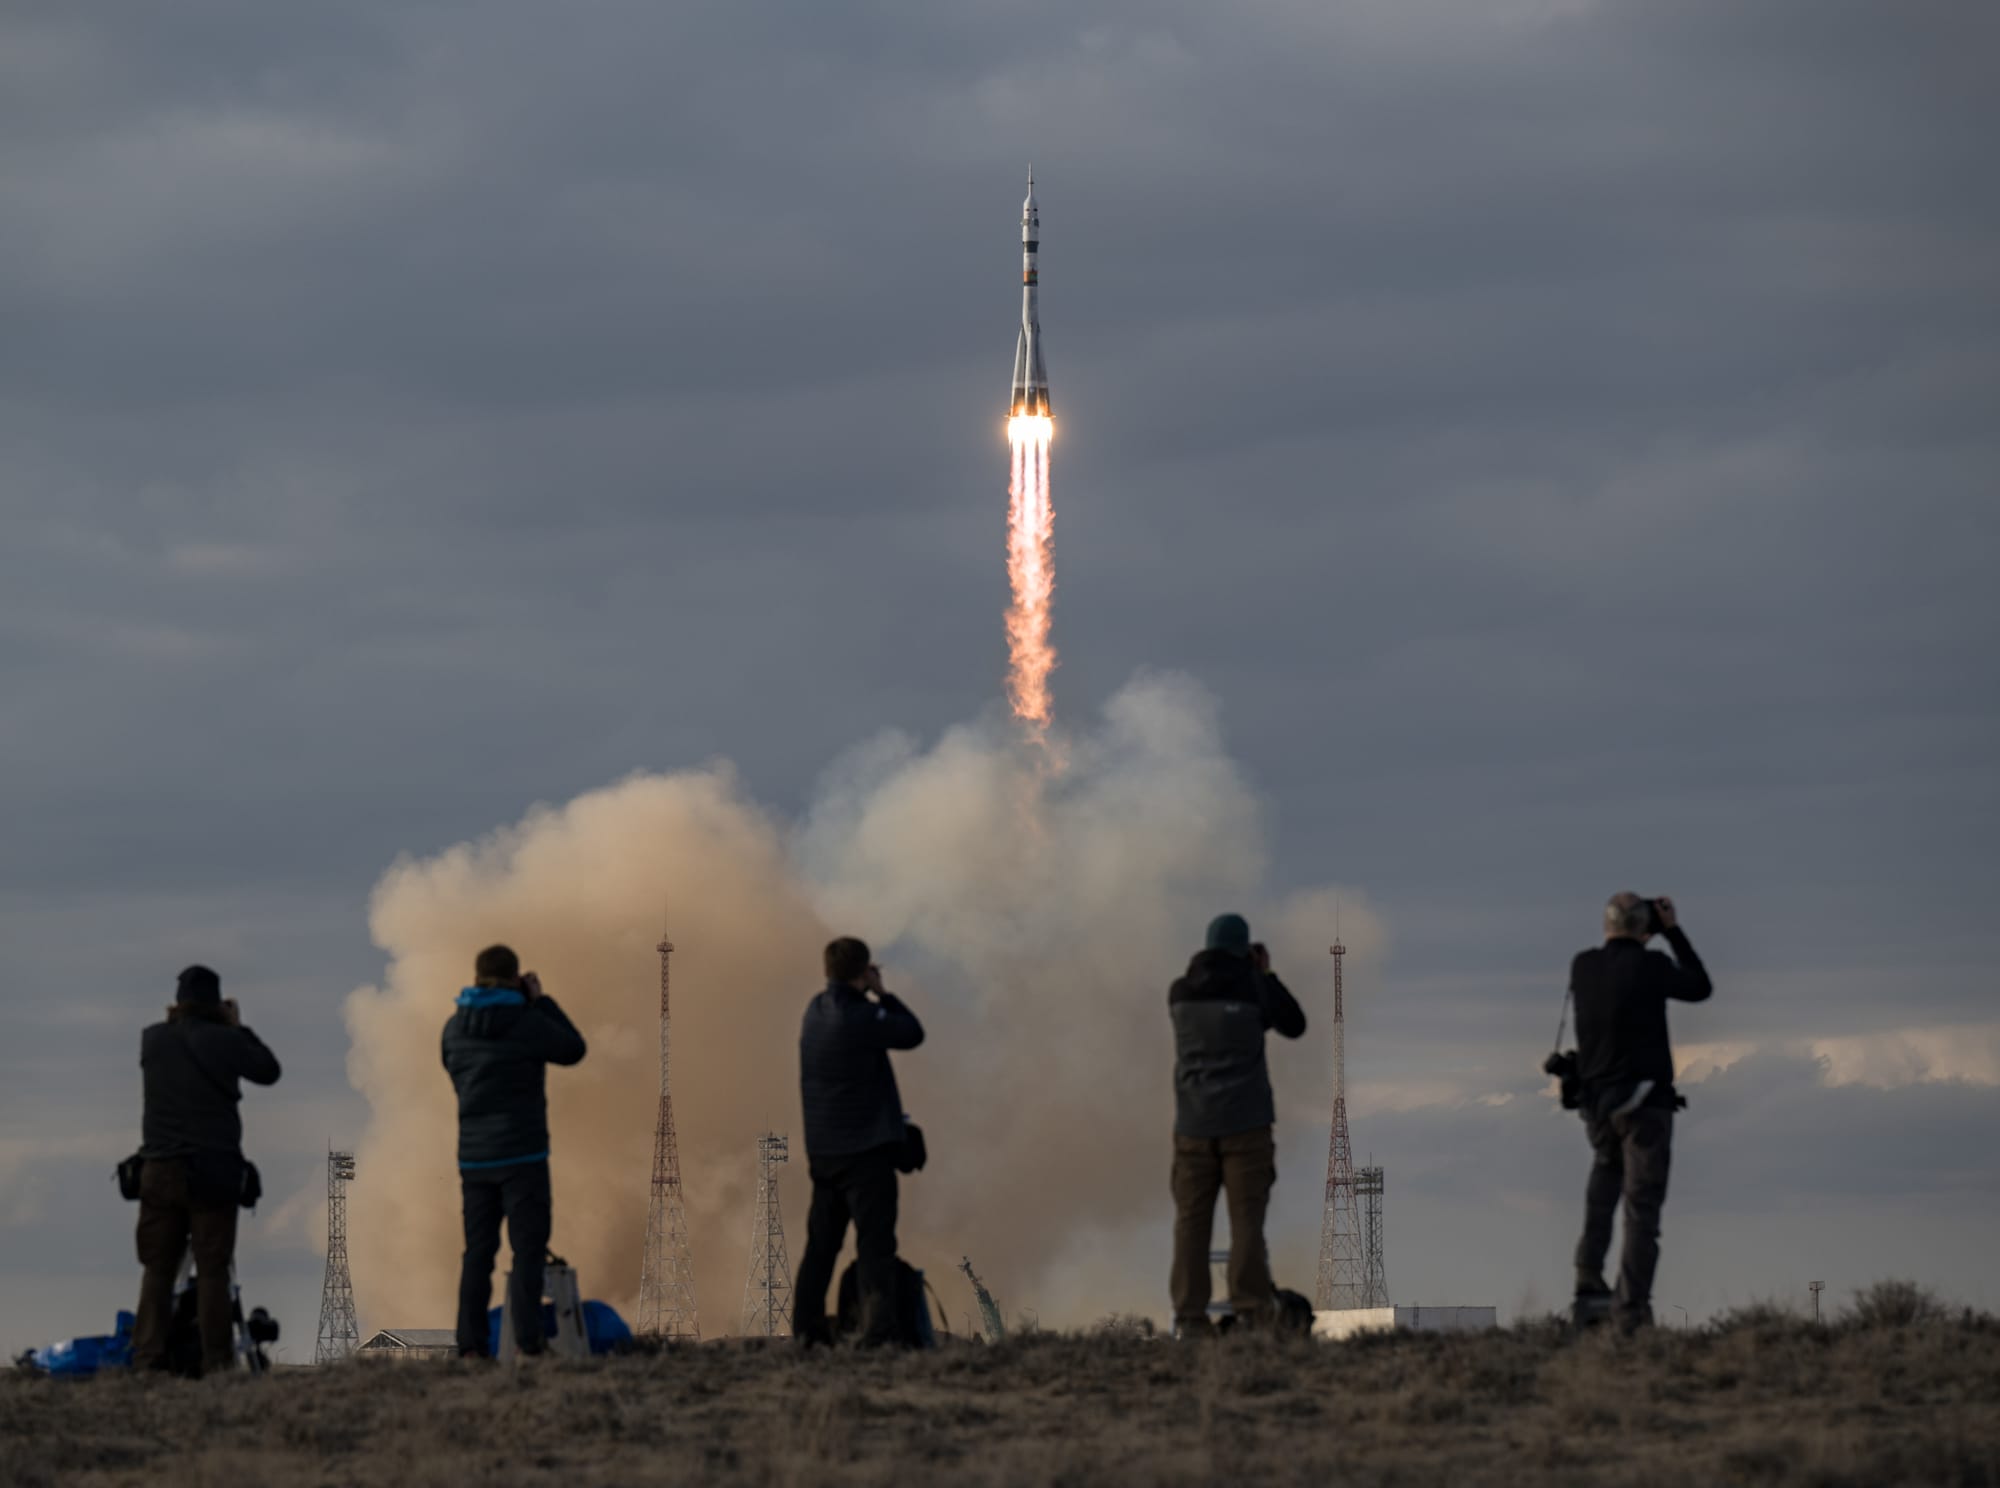 Soyuz 2.1a lifting off from the Baikonur Cosmodrome carrying the Soyuz MS-25 spacecraft. ©NASA